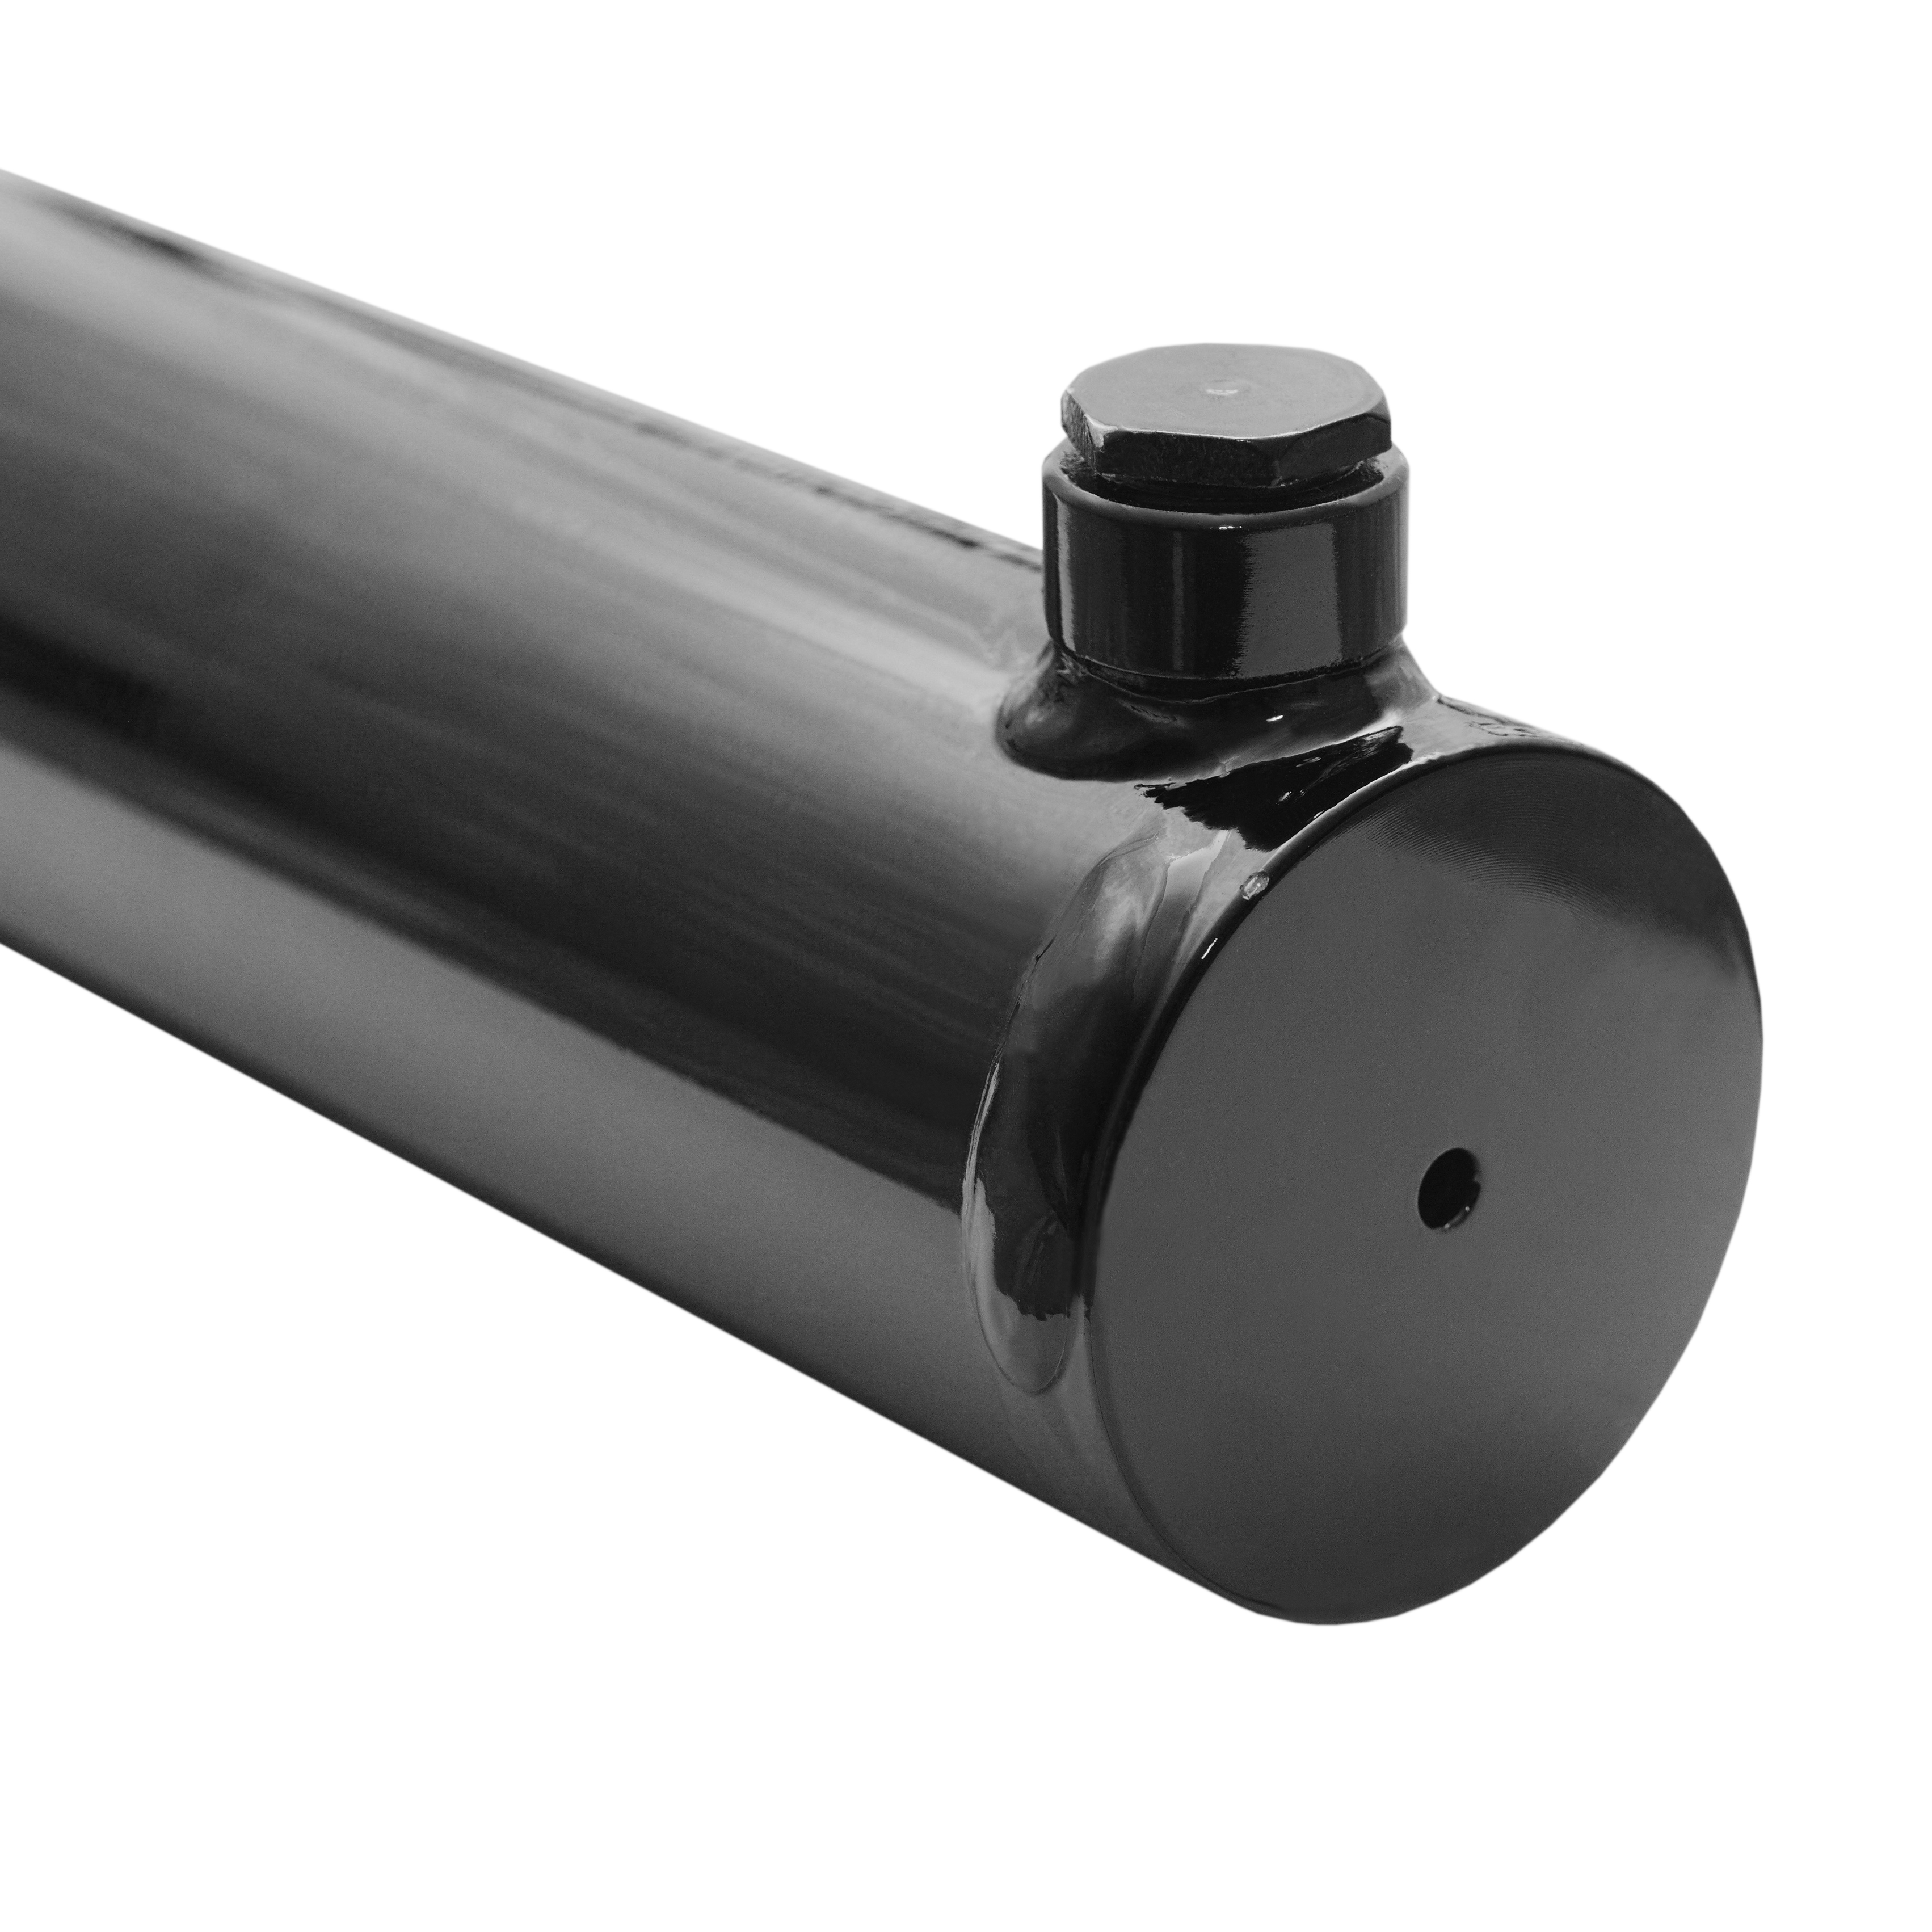 2 bore x 20 stroke hydraulic cylinder, welded universal double acting cylinder | Magister Hydraulics